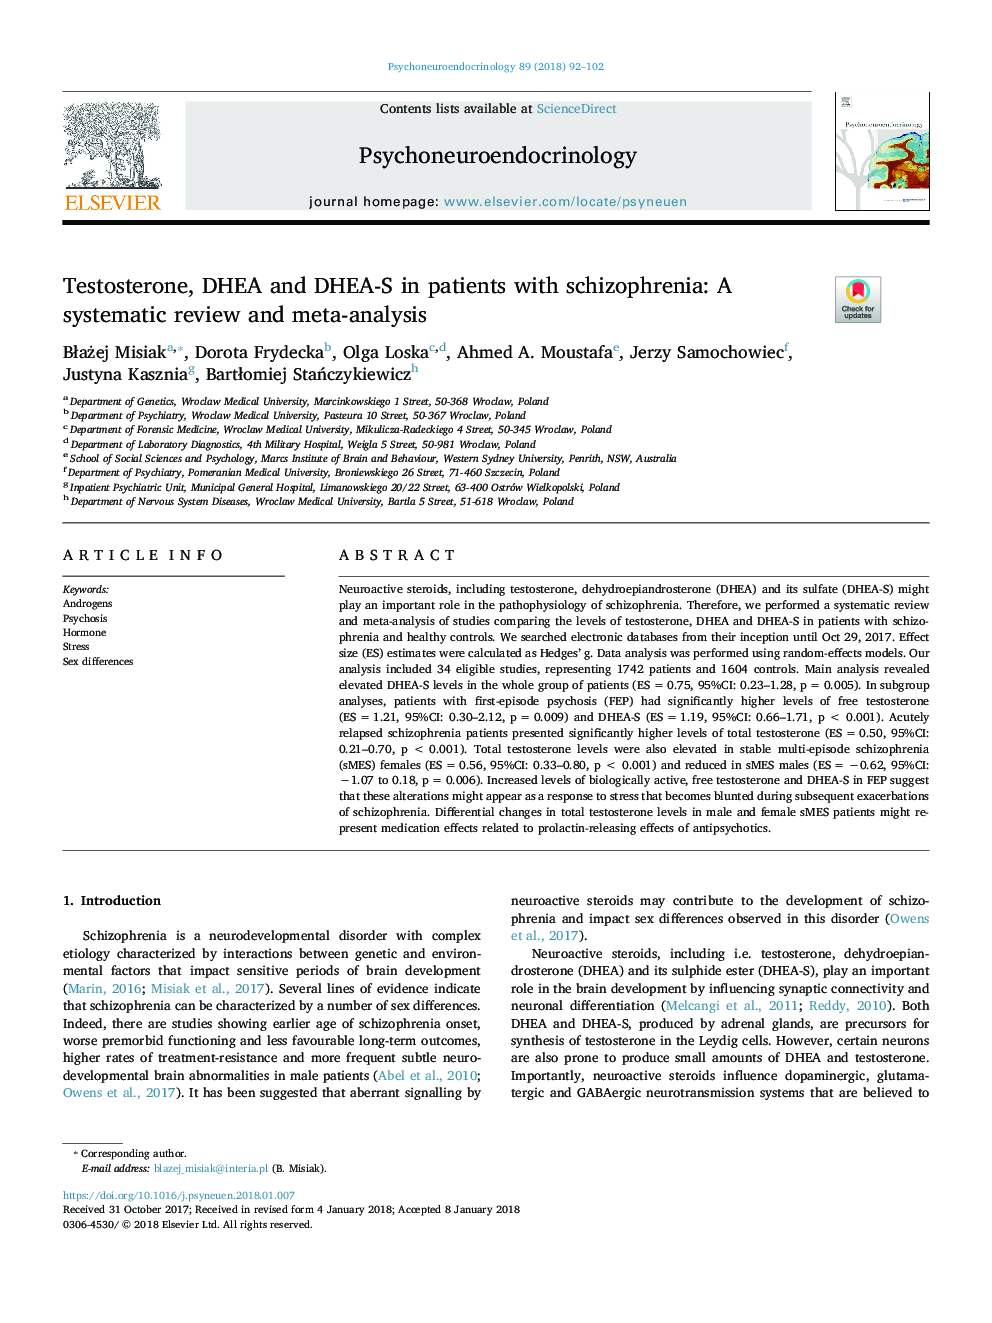 Testosterone, DHEA and DHEA-S in patients with schizophrenia: A systematic review and meta-analysis